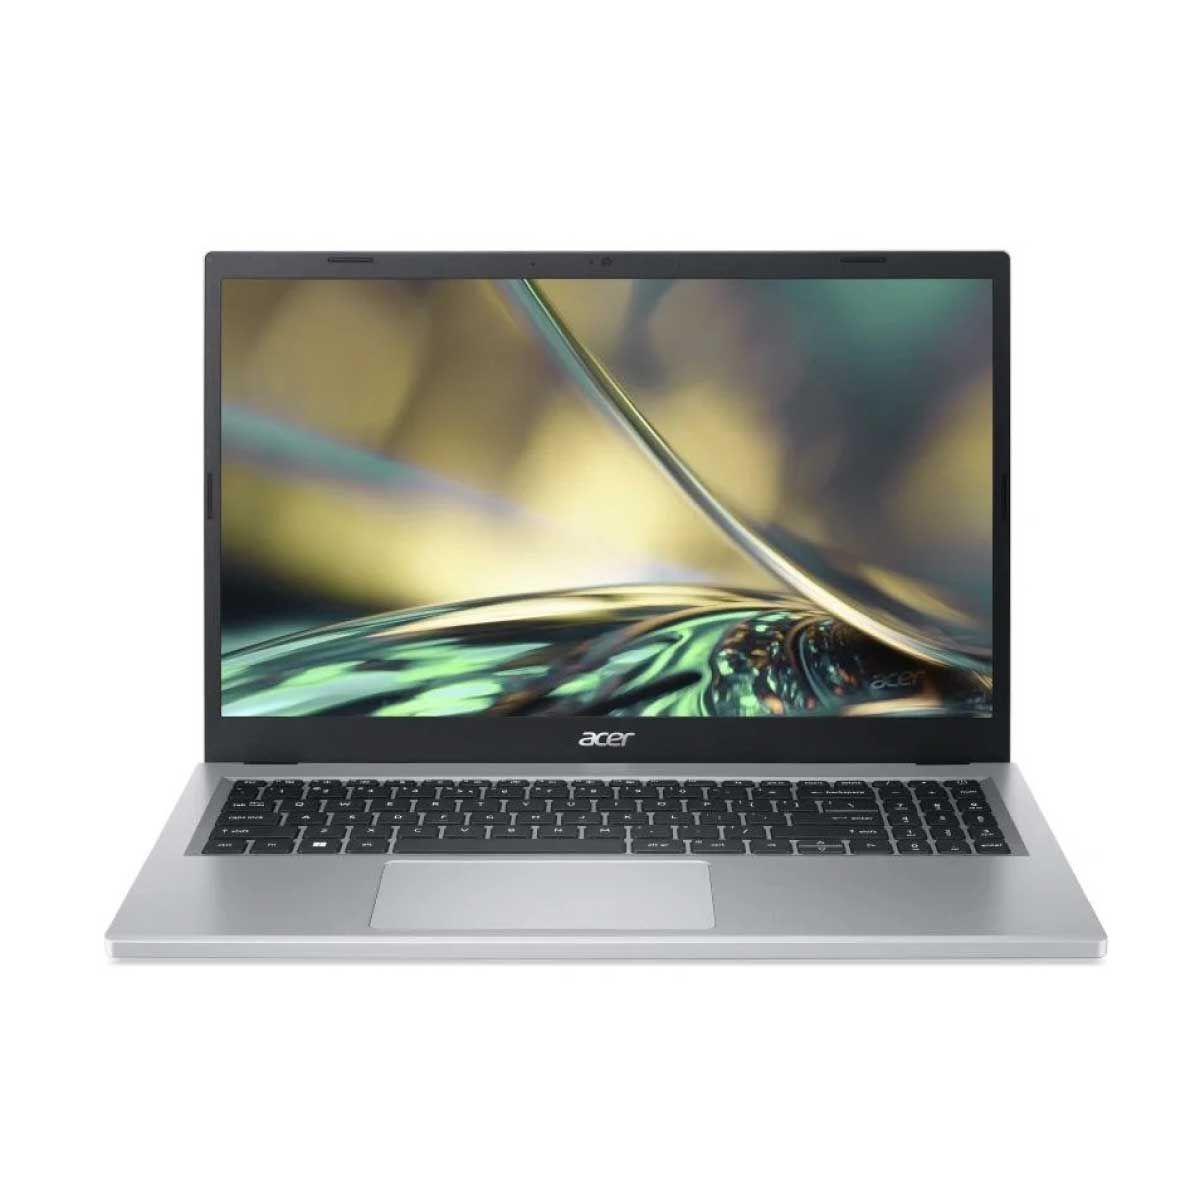 NOTEBOOK (โน้ตบุ๊ค) ACER ASPIRE 3 A315-510P-P330 (PURE SILVER)